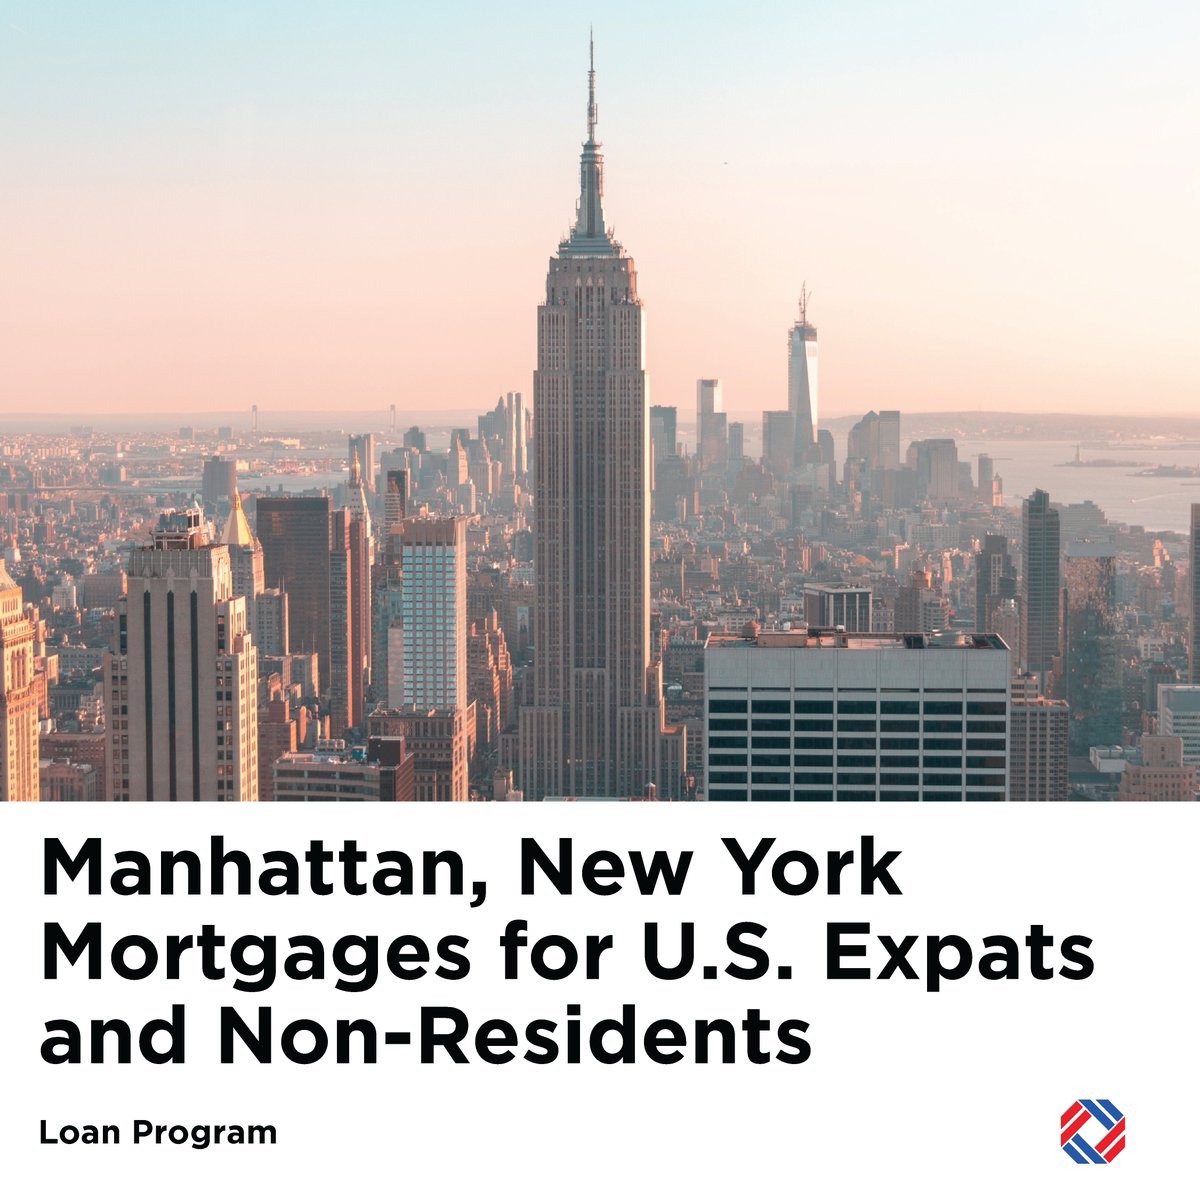 Manhattan, New York Mortgages for U.S. Expats and Non-Residents

Connect with us today at hello@americamortgages.com to find out more.
.
.
.
#Manhattan #NewYorkCity #NYCRealEstate #RealEstateAgent #RealEstate #NewYork #Property #ManhattanRealtor #NYC #NewYorkRealEstate #USA